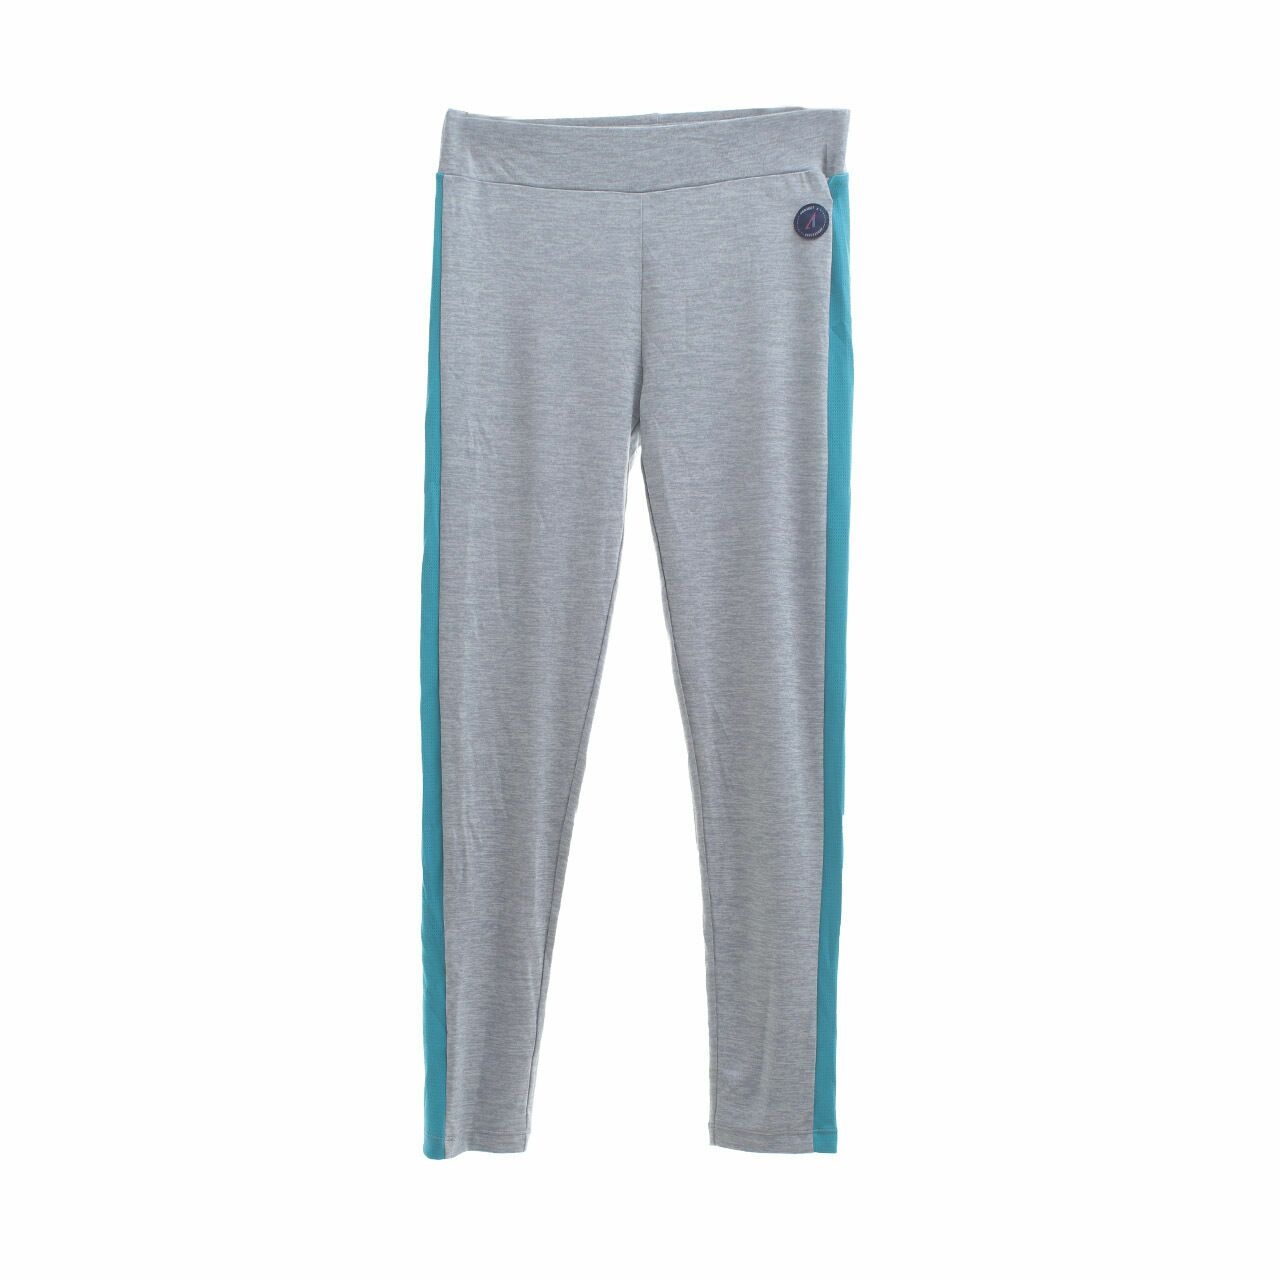 Project A Athleisure Grey Legging Pants